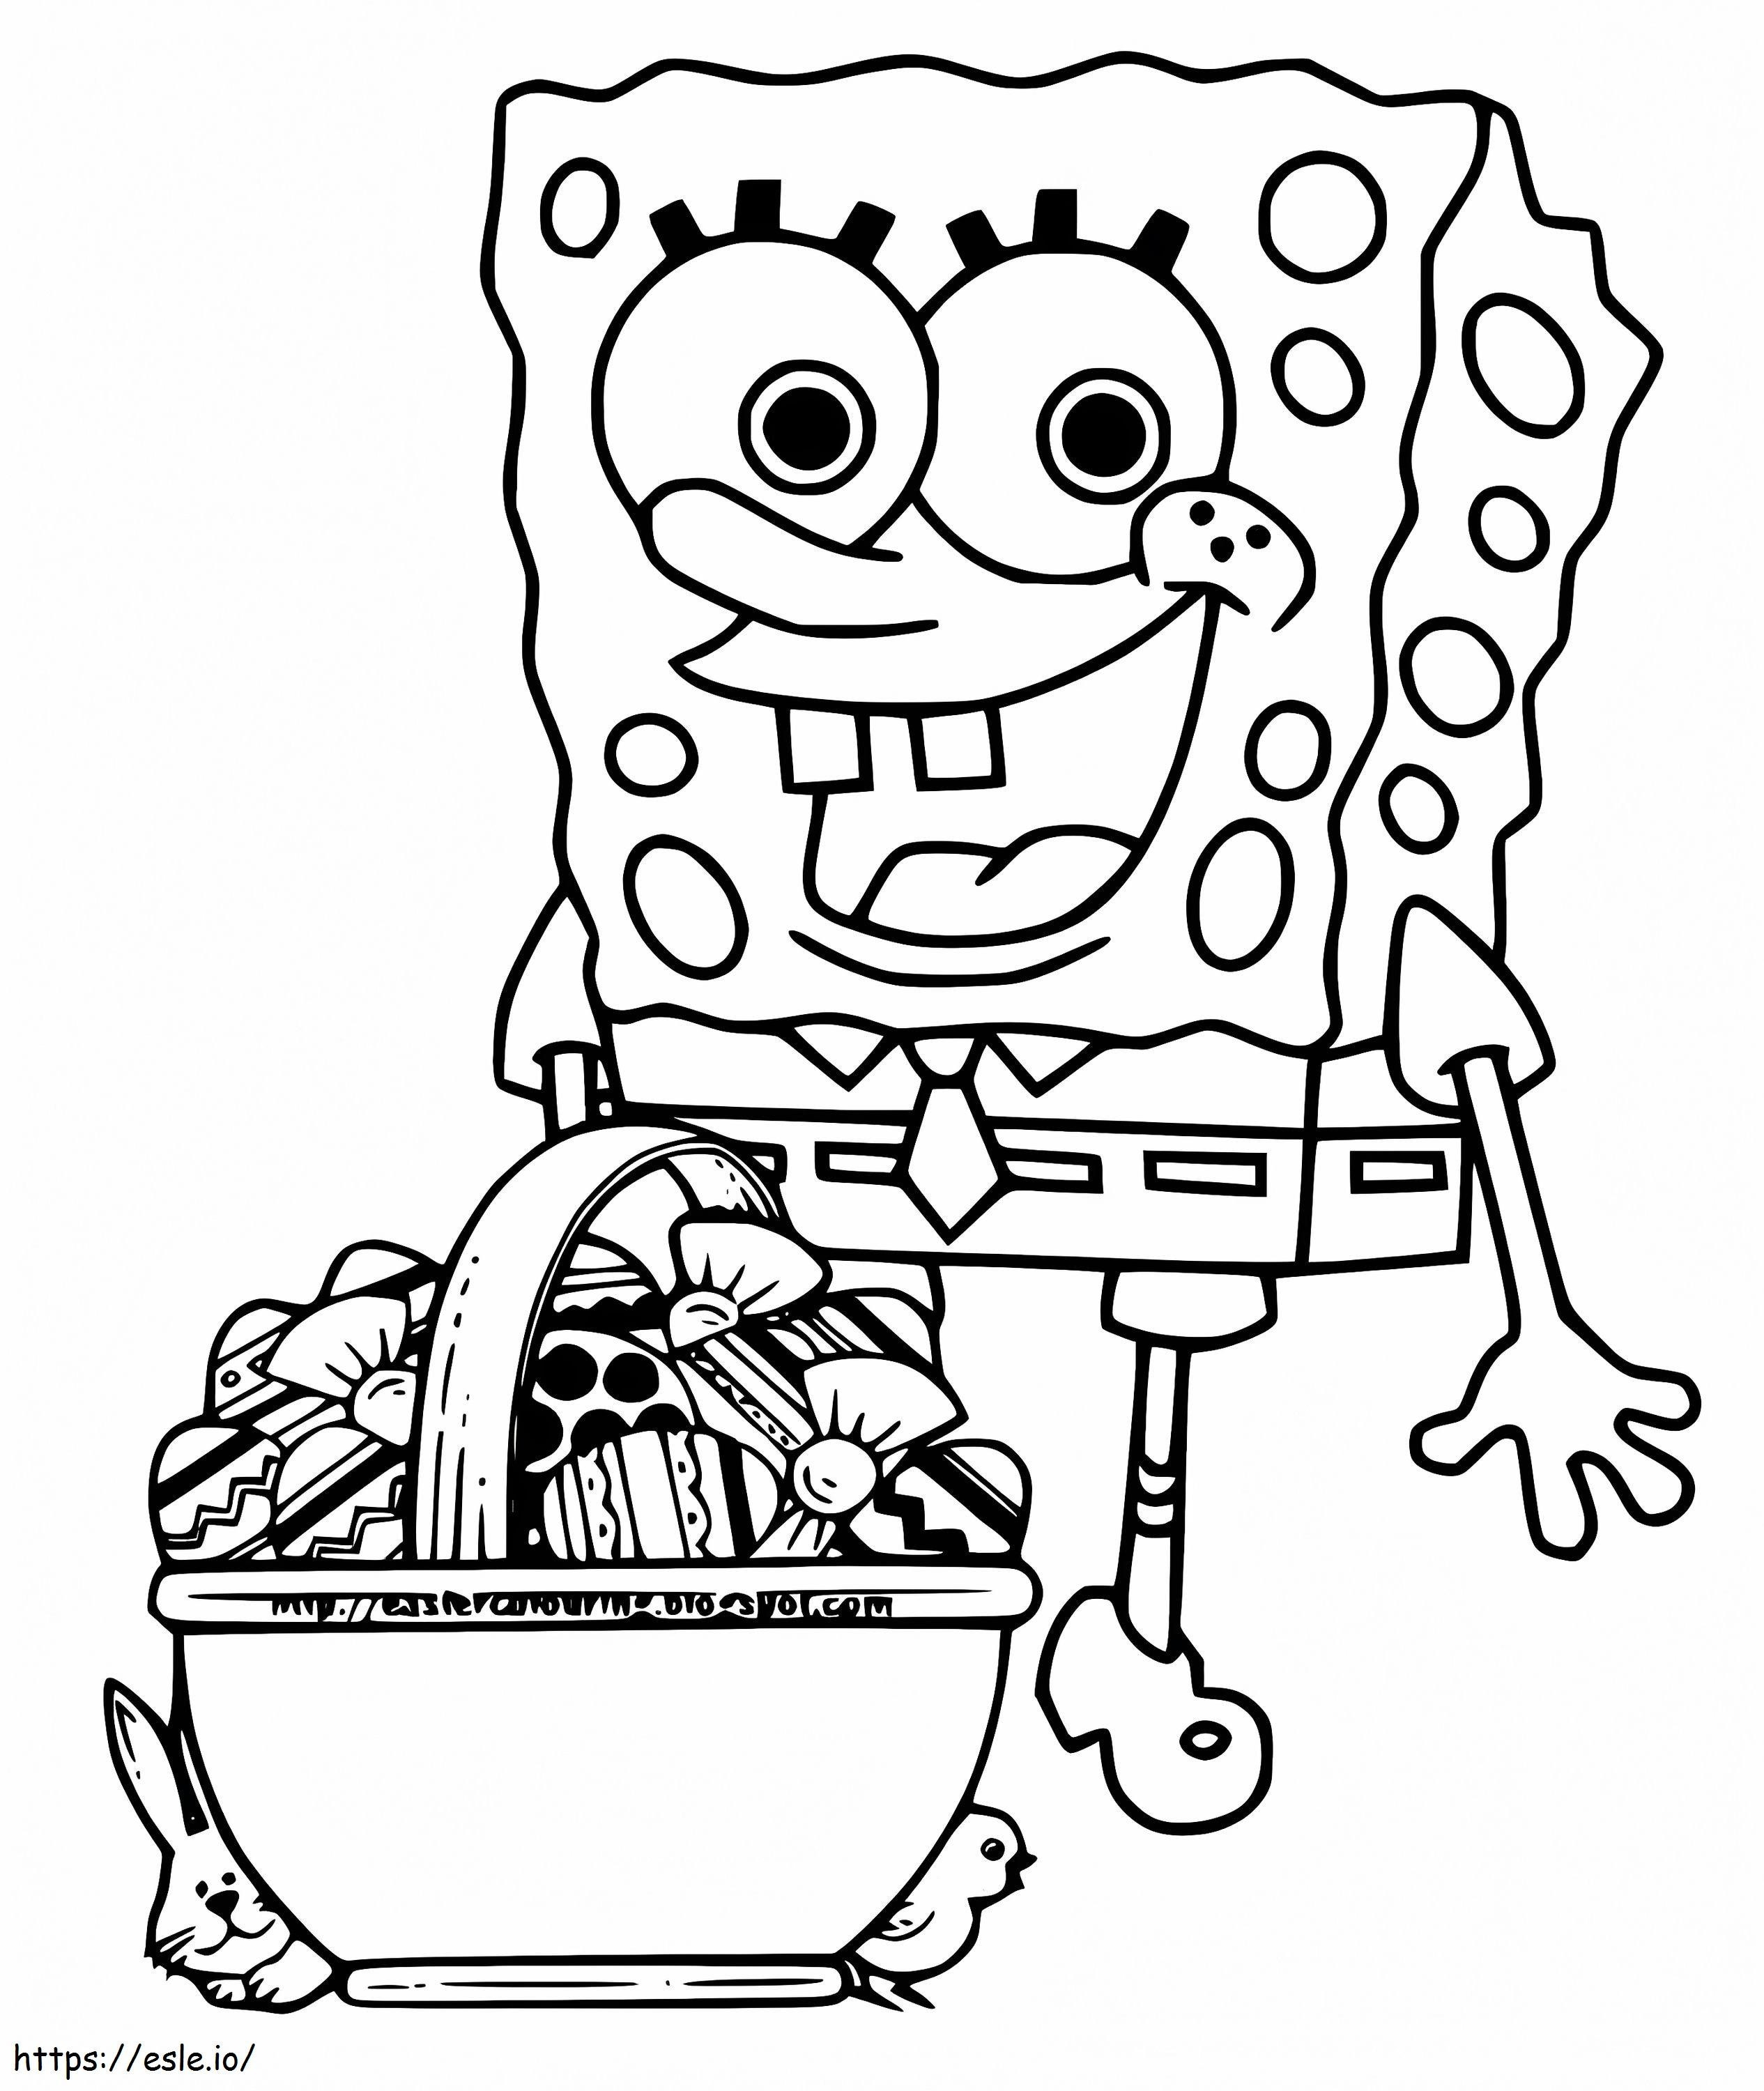 Spongebob With Easter Basket coloring page